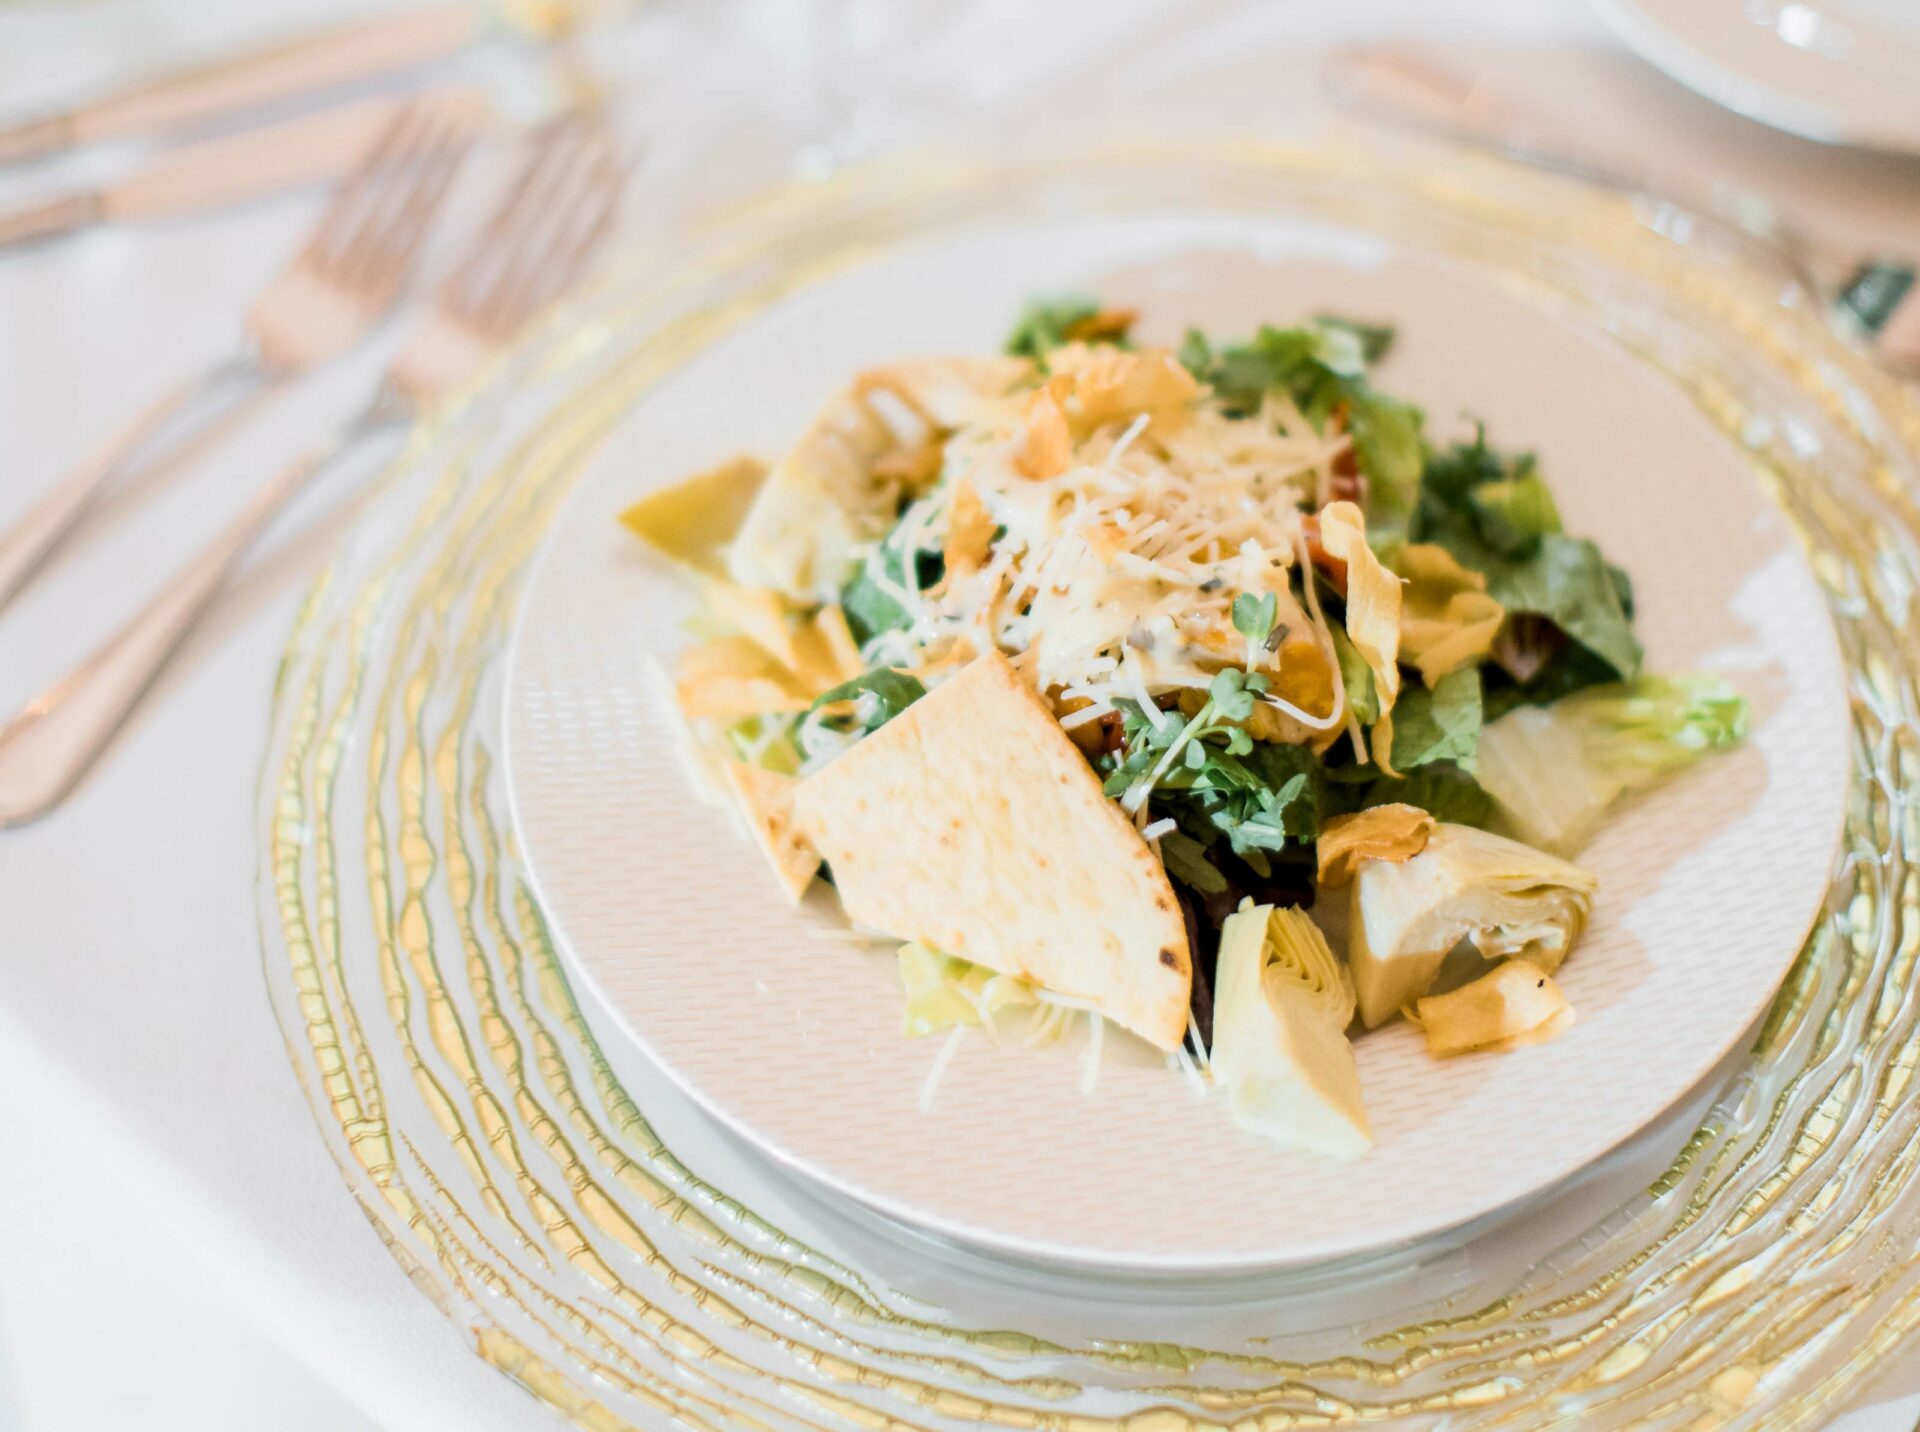 Cheese topped salad on ornate golden placemat